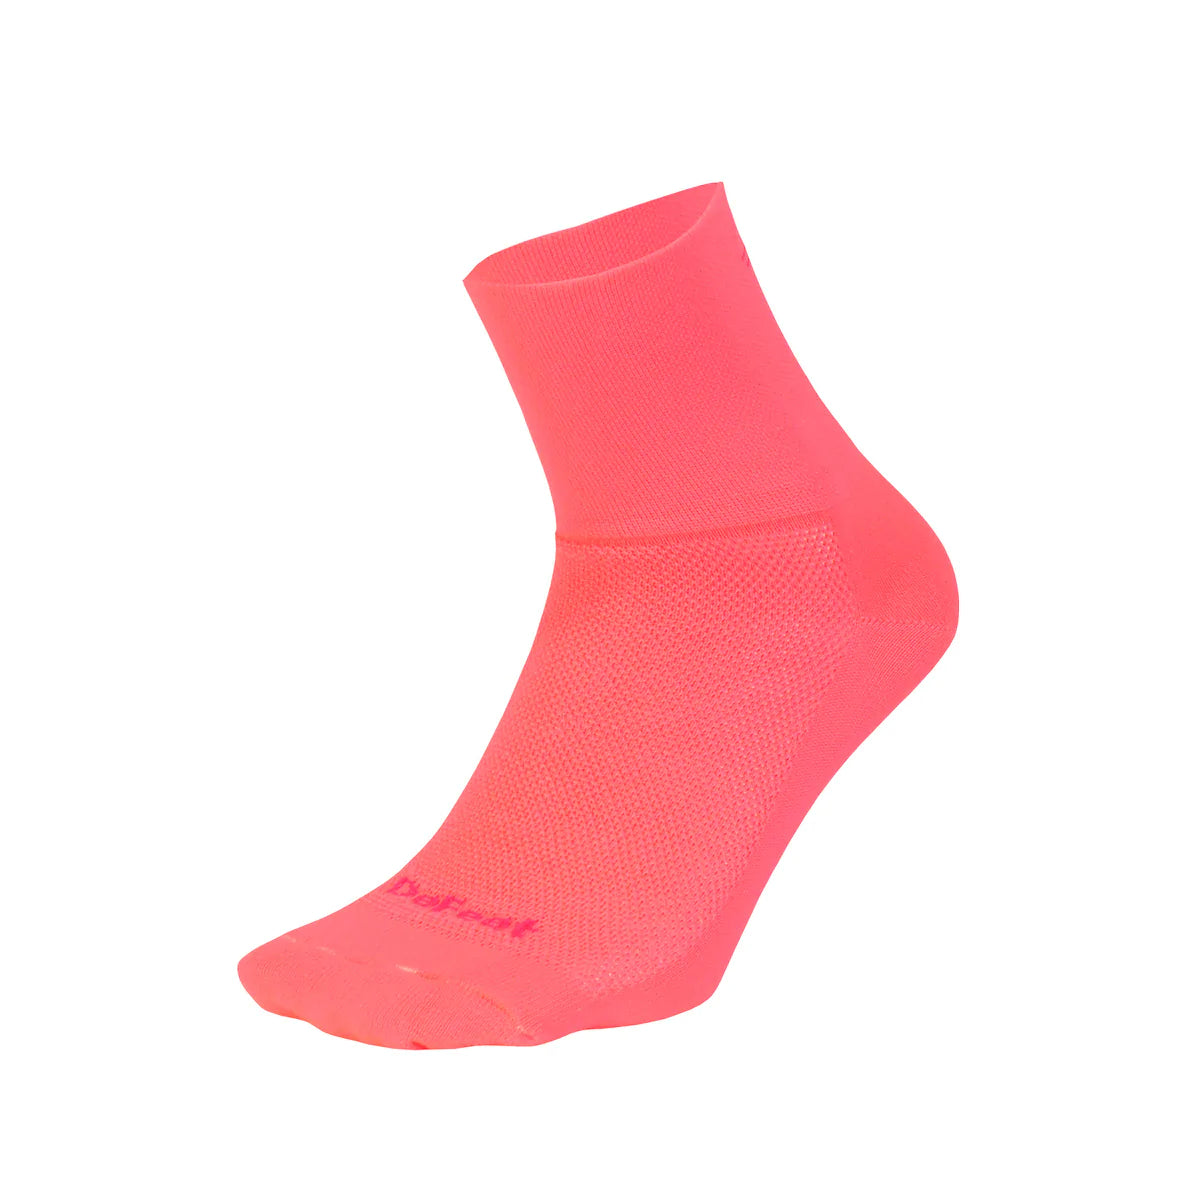 Aireator 3" cuff cycling sock in pink with small tonal pink d-logo on back of cuff